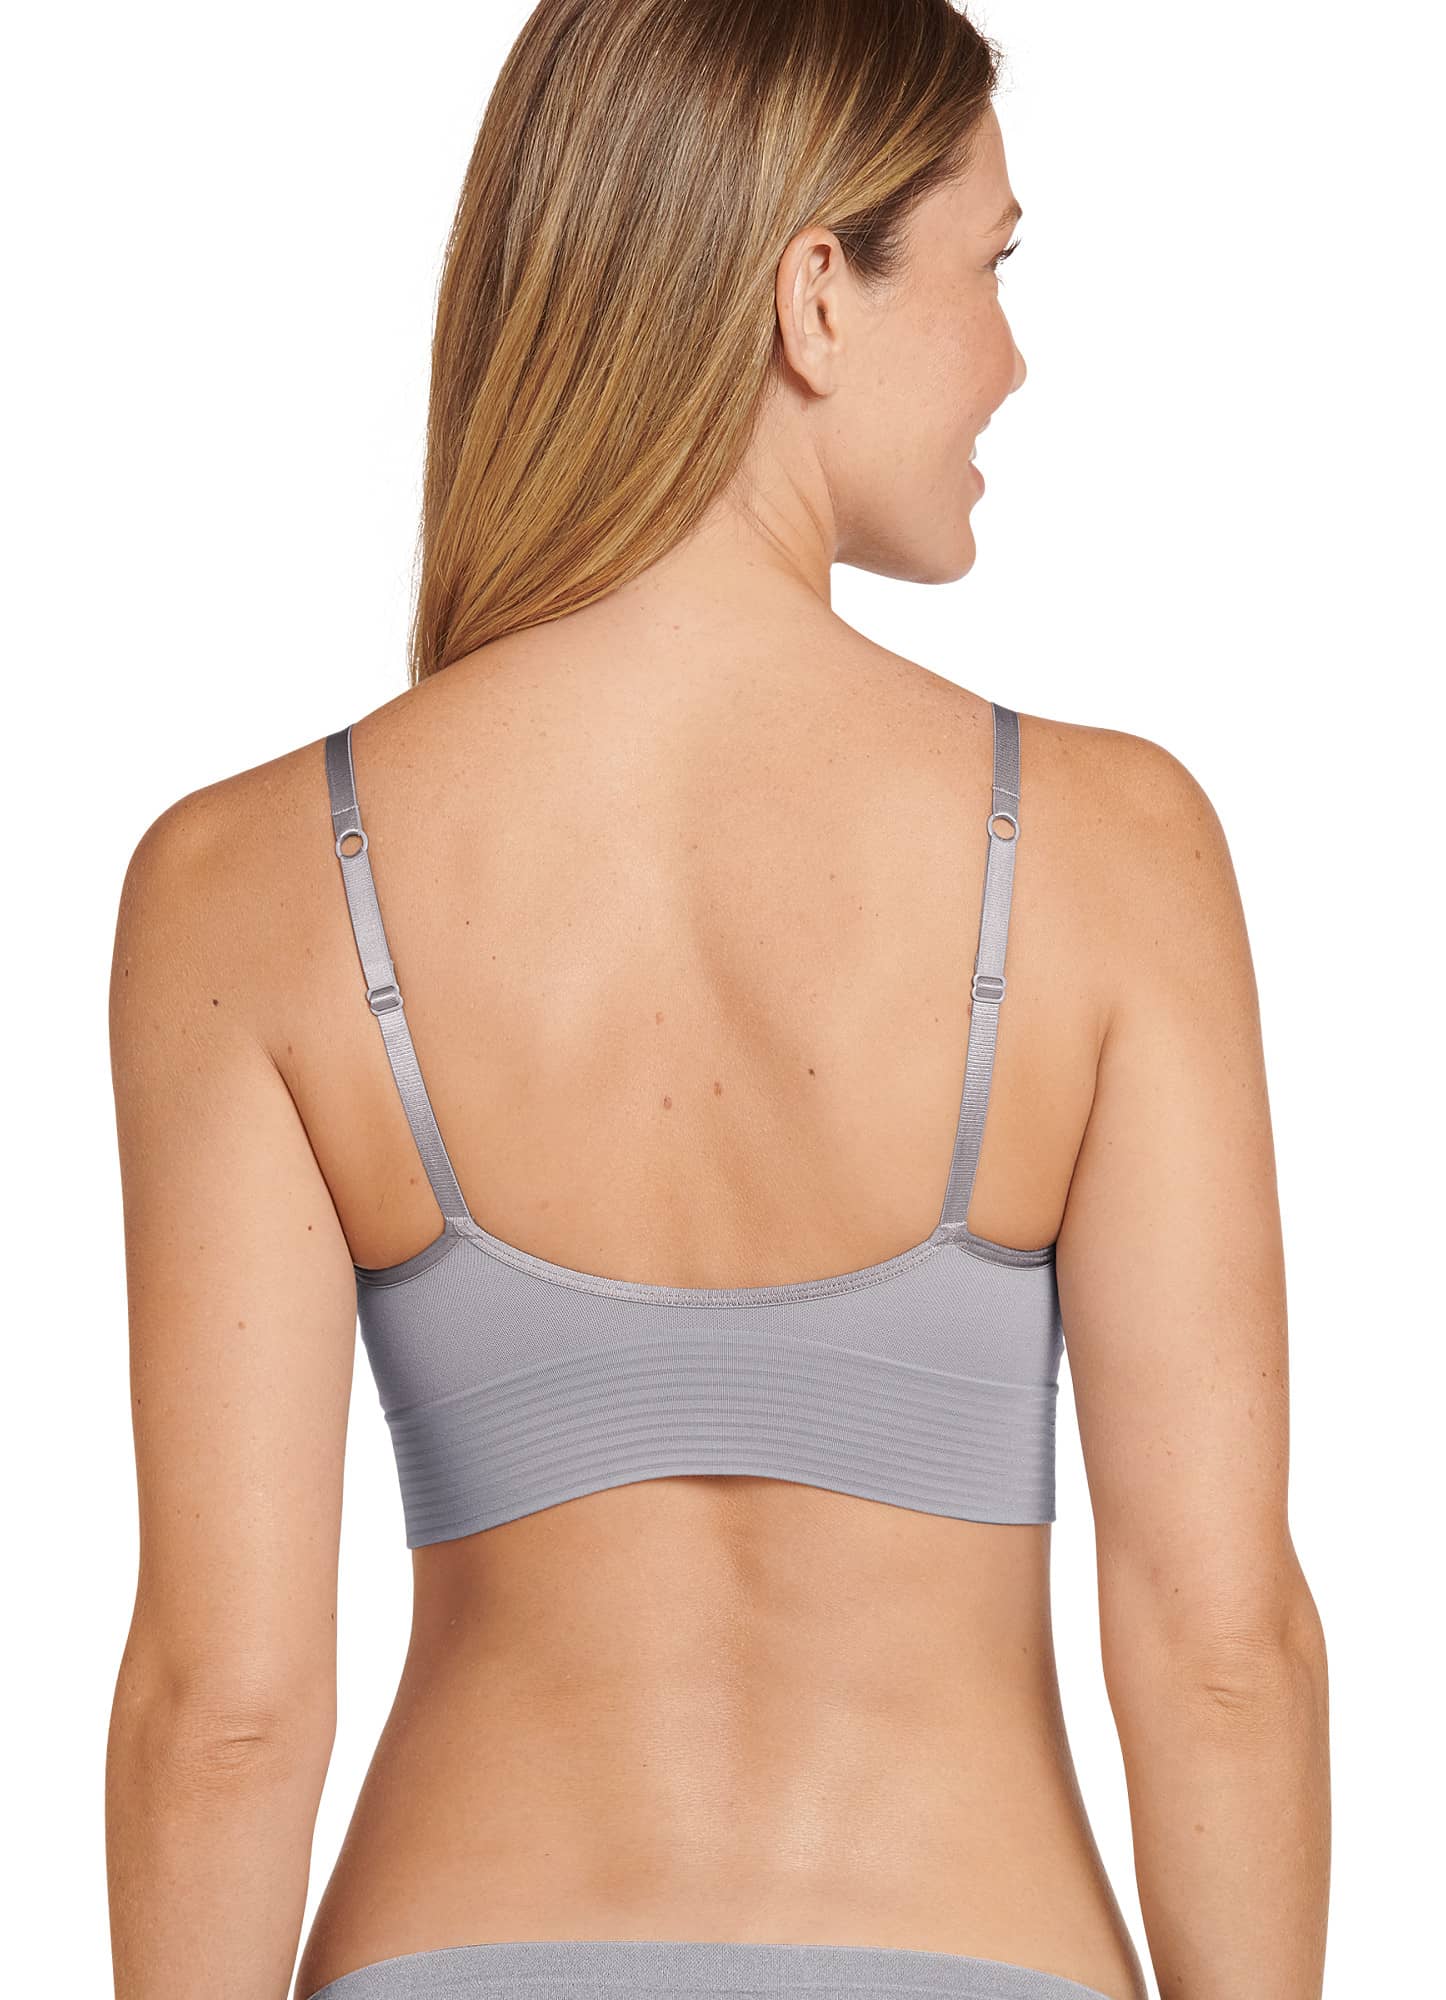 Jockey Women's Natural Beauty Molded Cup Bralette with Back